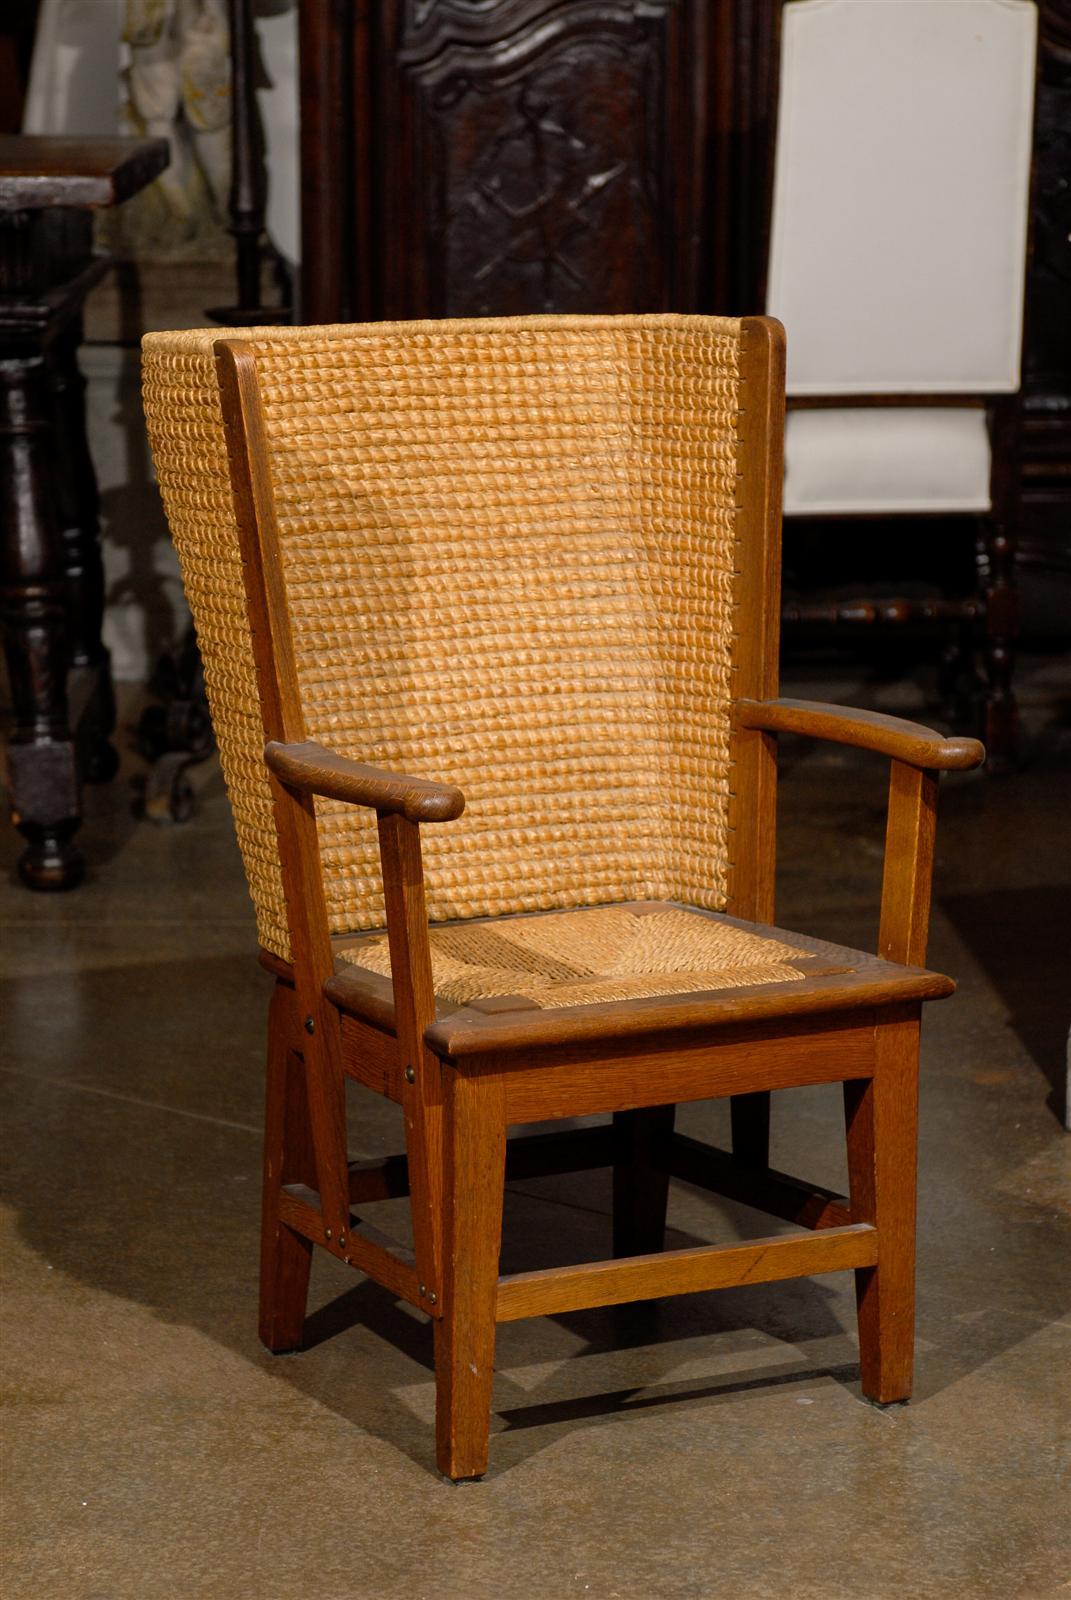 Small Scale Wood and Reed Child's  Chair from the Isle of Orkney.